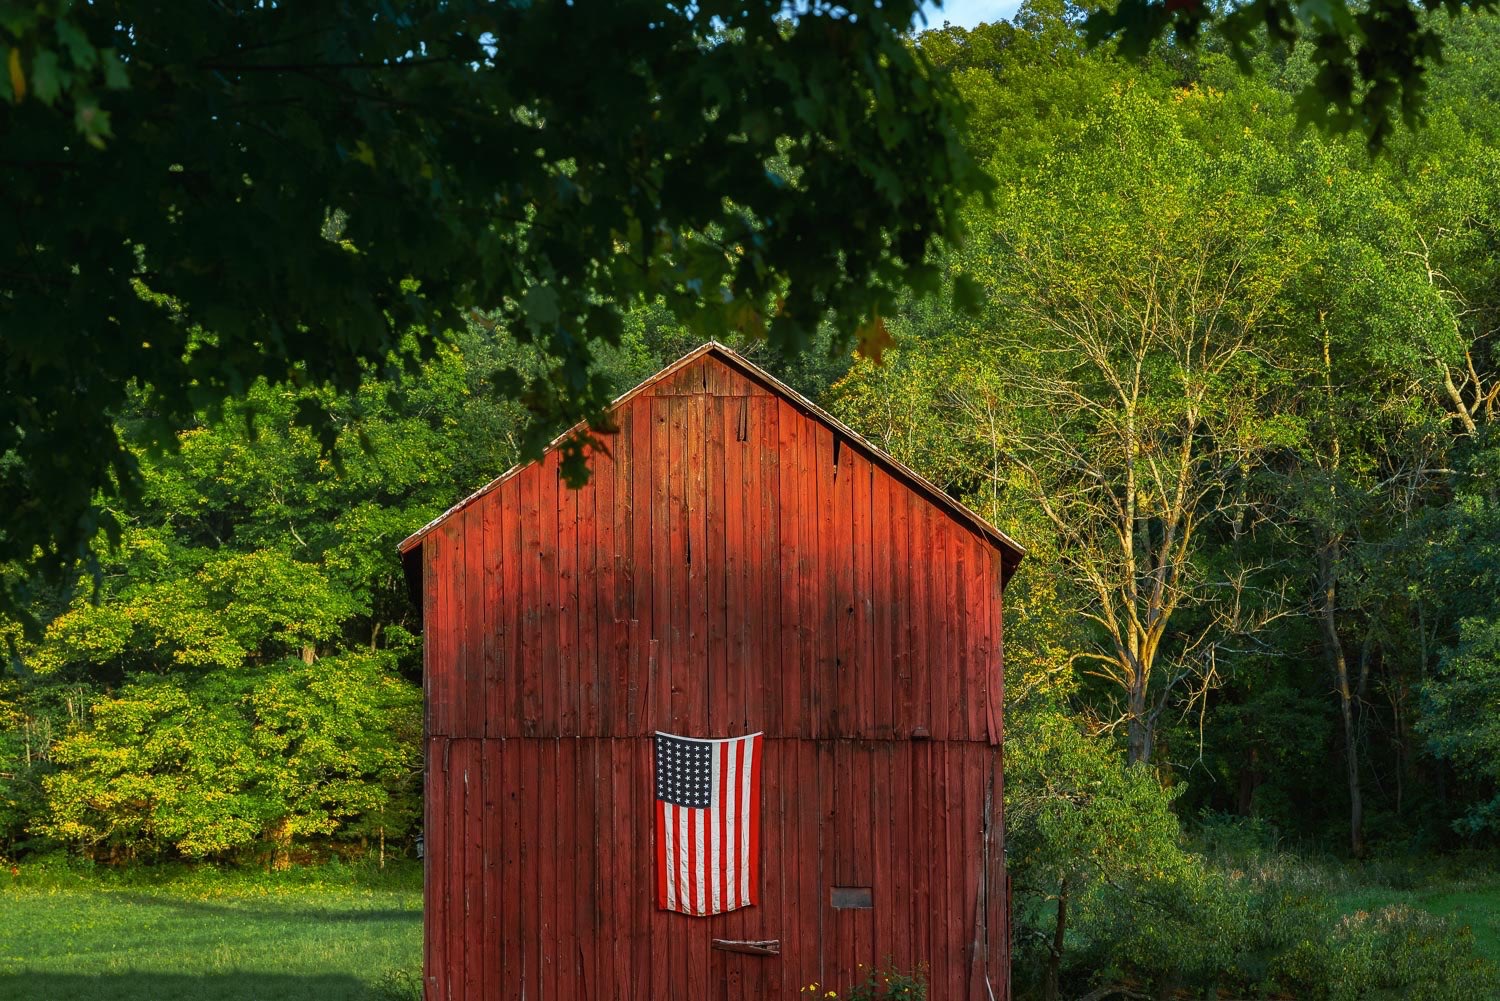 This historic barn glows in the autumn light. Its a piece of Americana with the american flag on the red barn.  johnstuartstudio-compress.jpg